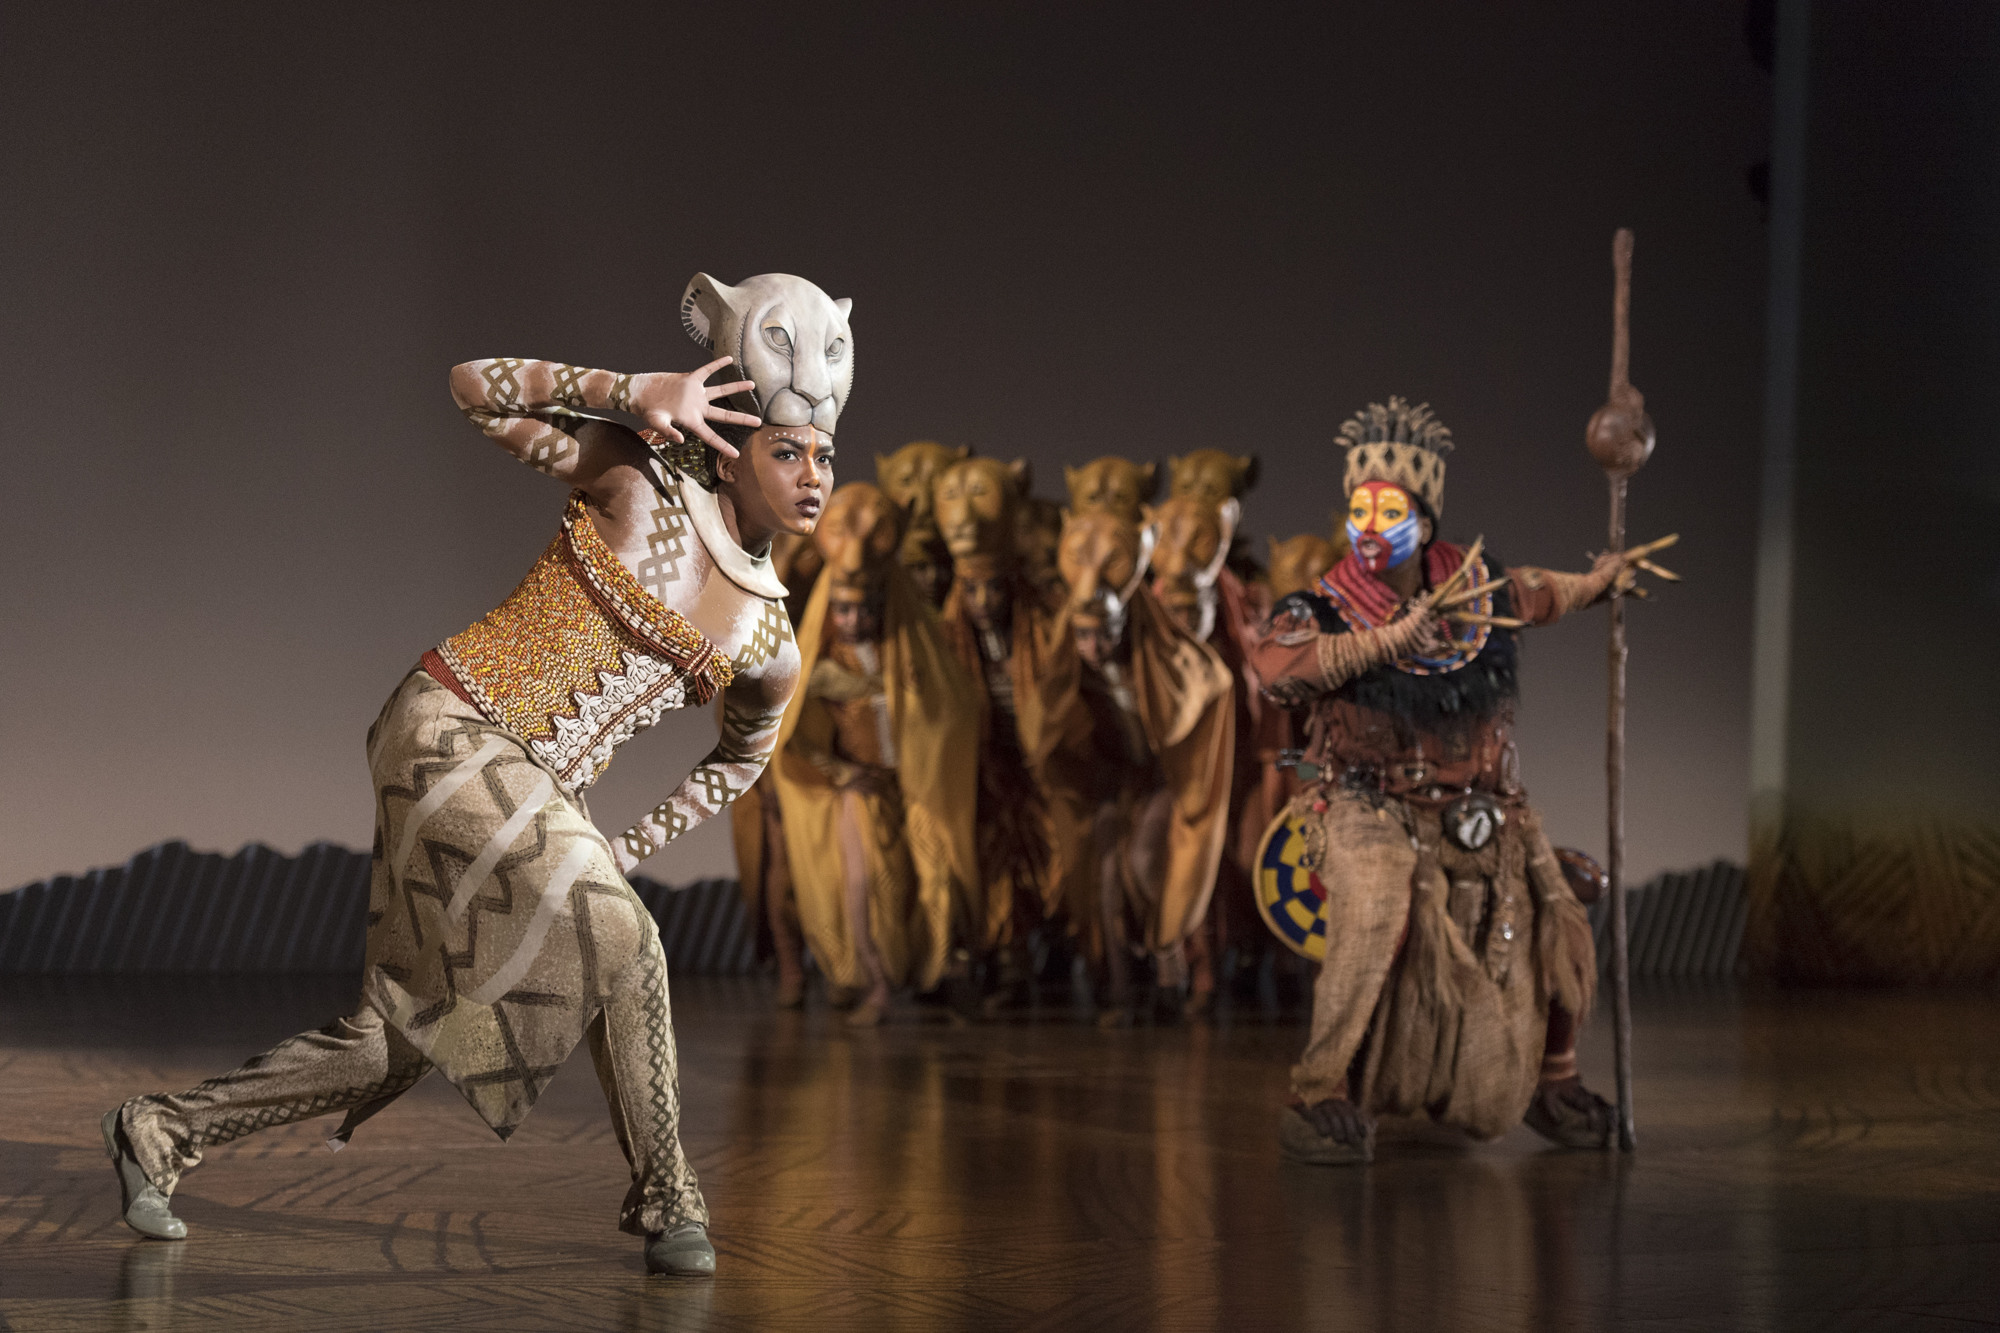 Nia Holloway performs as Nala, backed up by the lionesses of the pride (one of whom is now JoAnna Ford, who will perform in the third week of the Sarasota run at Van Wezel Performing Arts Hall) and Buyi Zama as Rafiki. Courtesy photo